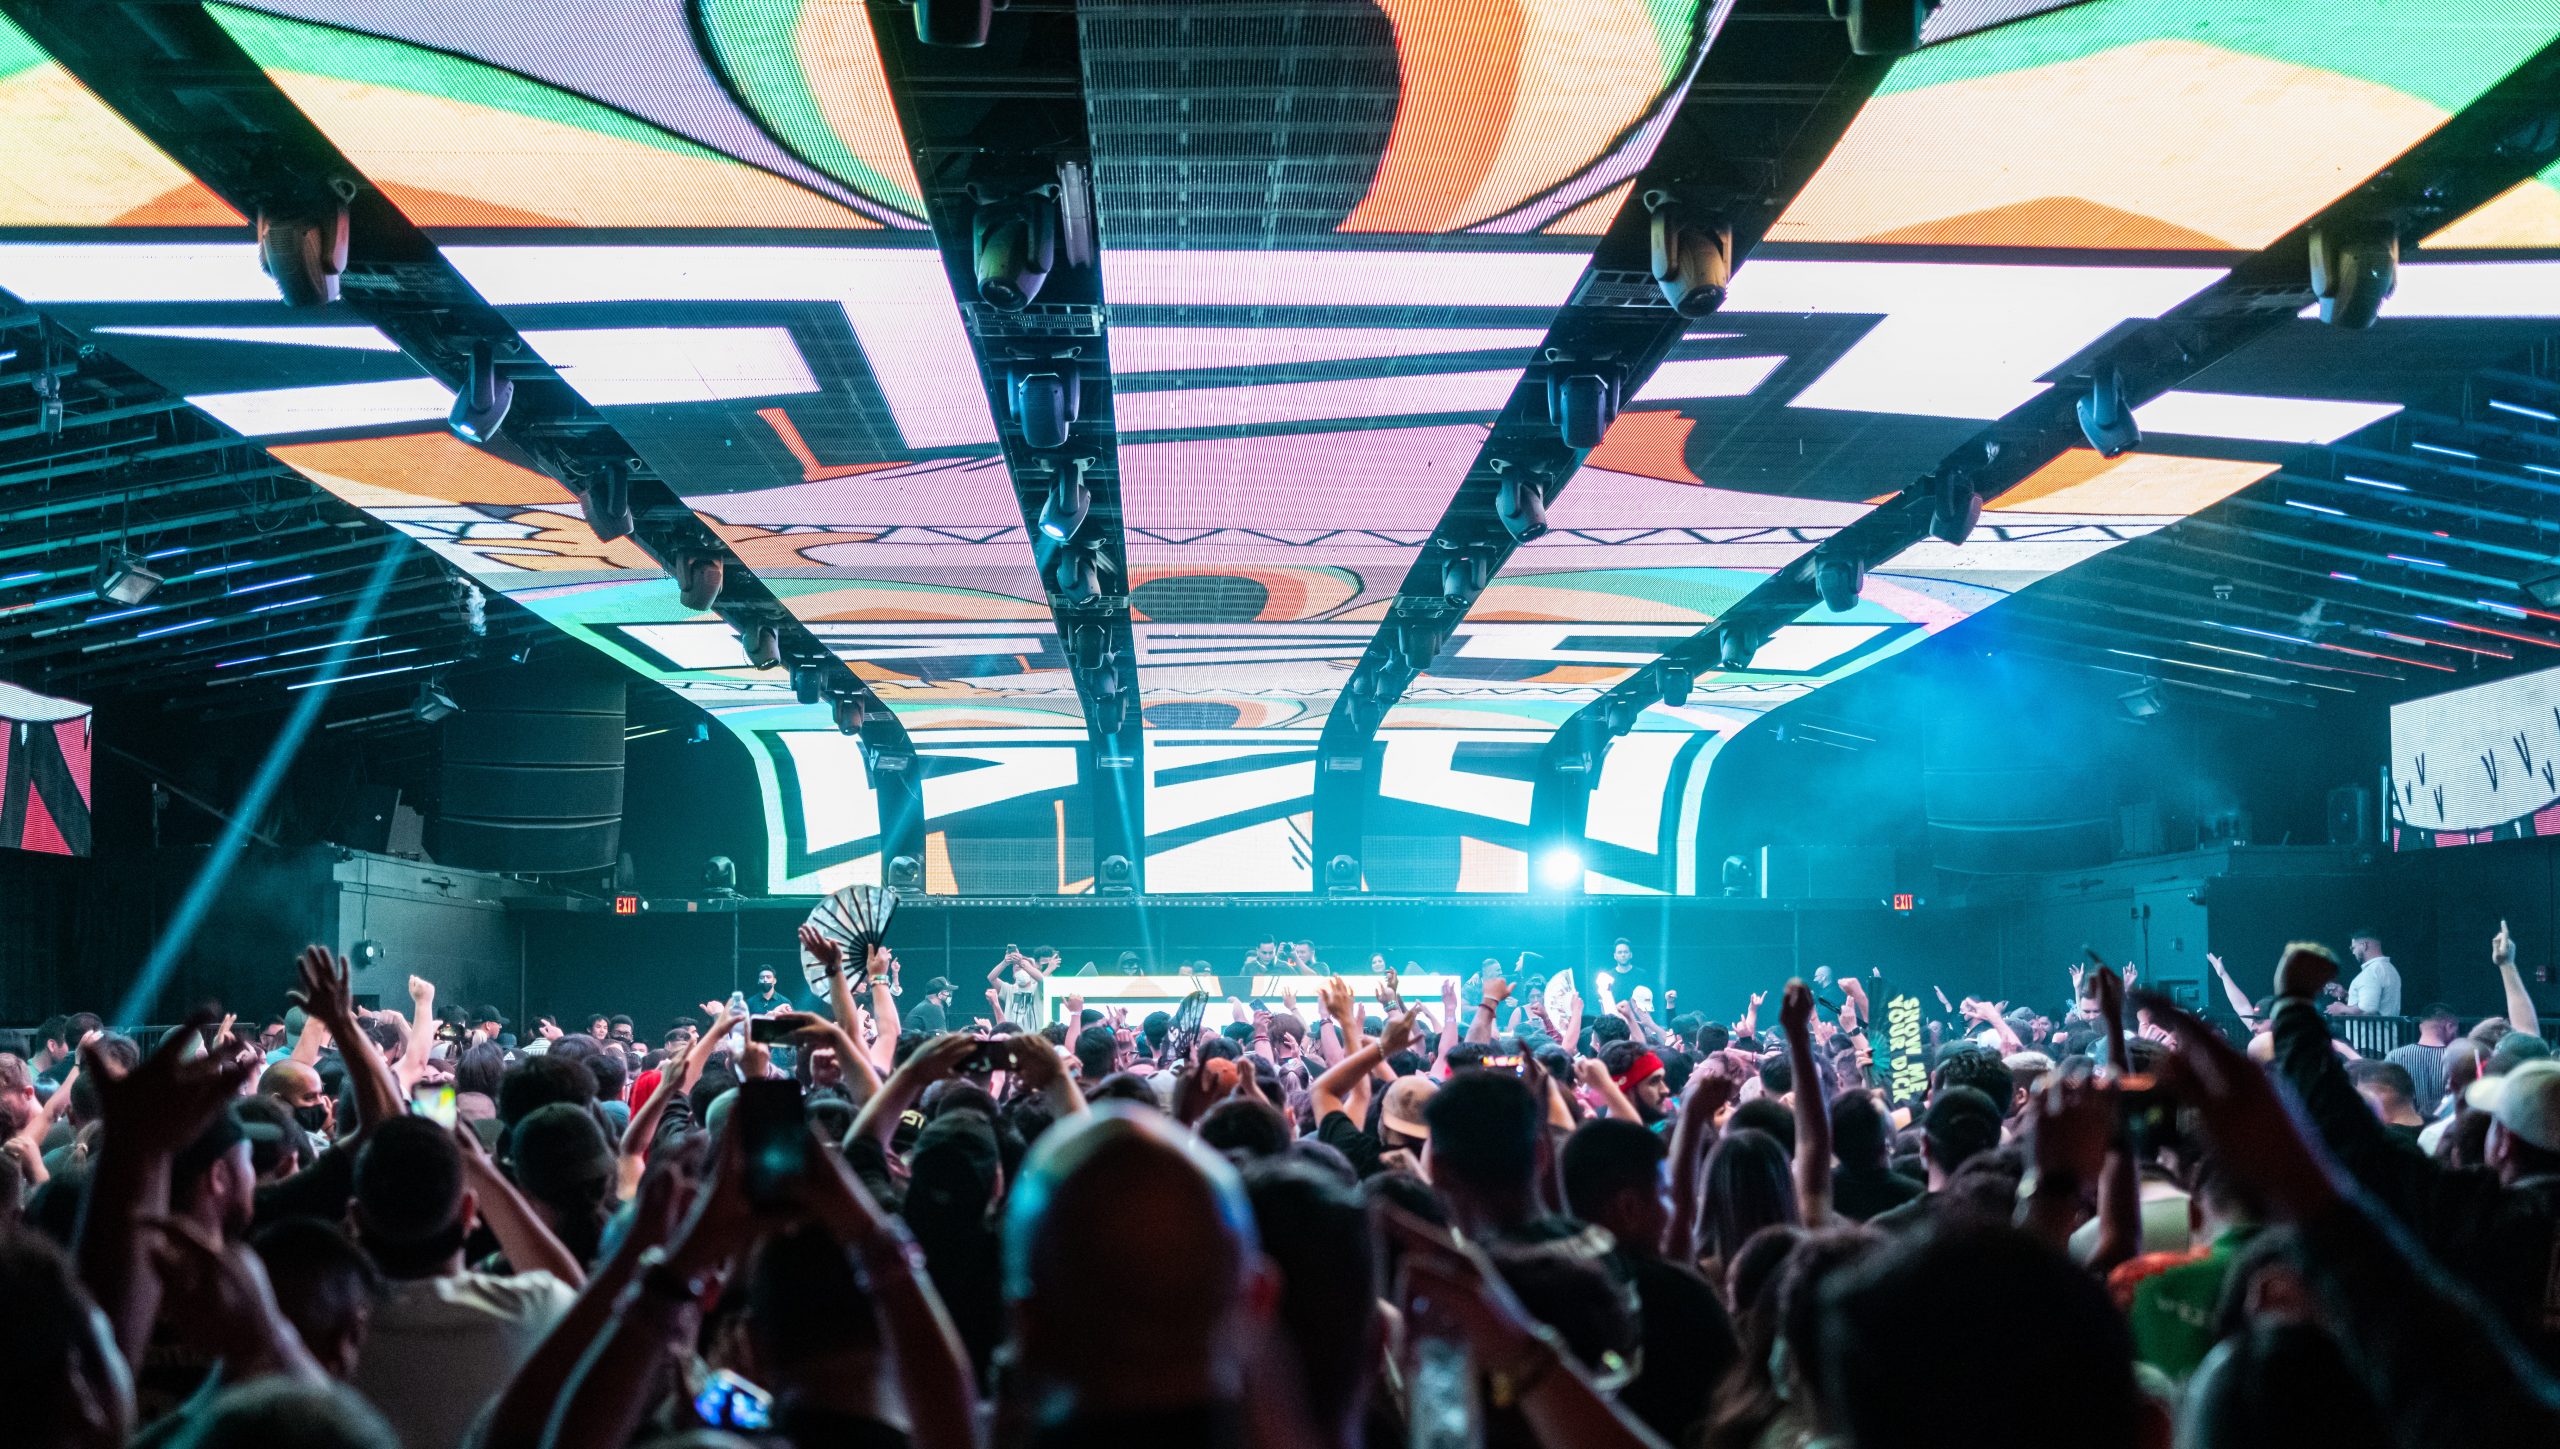 Nightclub SOPs have finally been announced ahead of their reopening this weekend. Image credit: Tyler Clemmensen on Unsplash